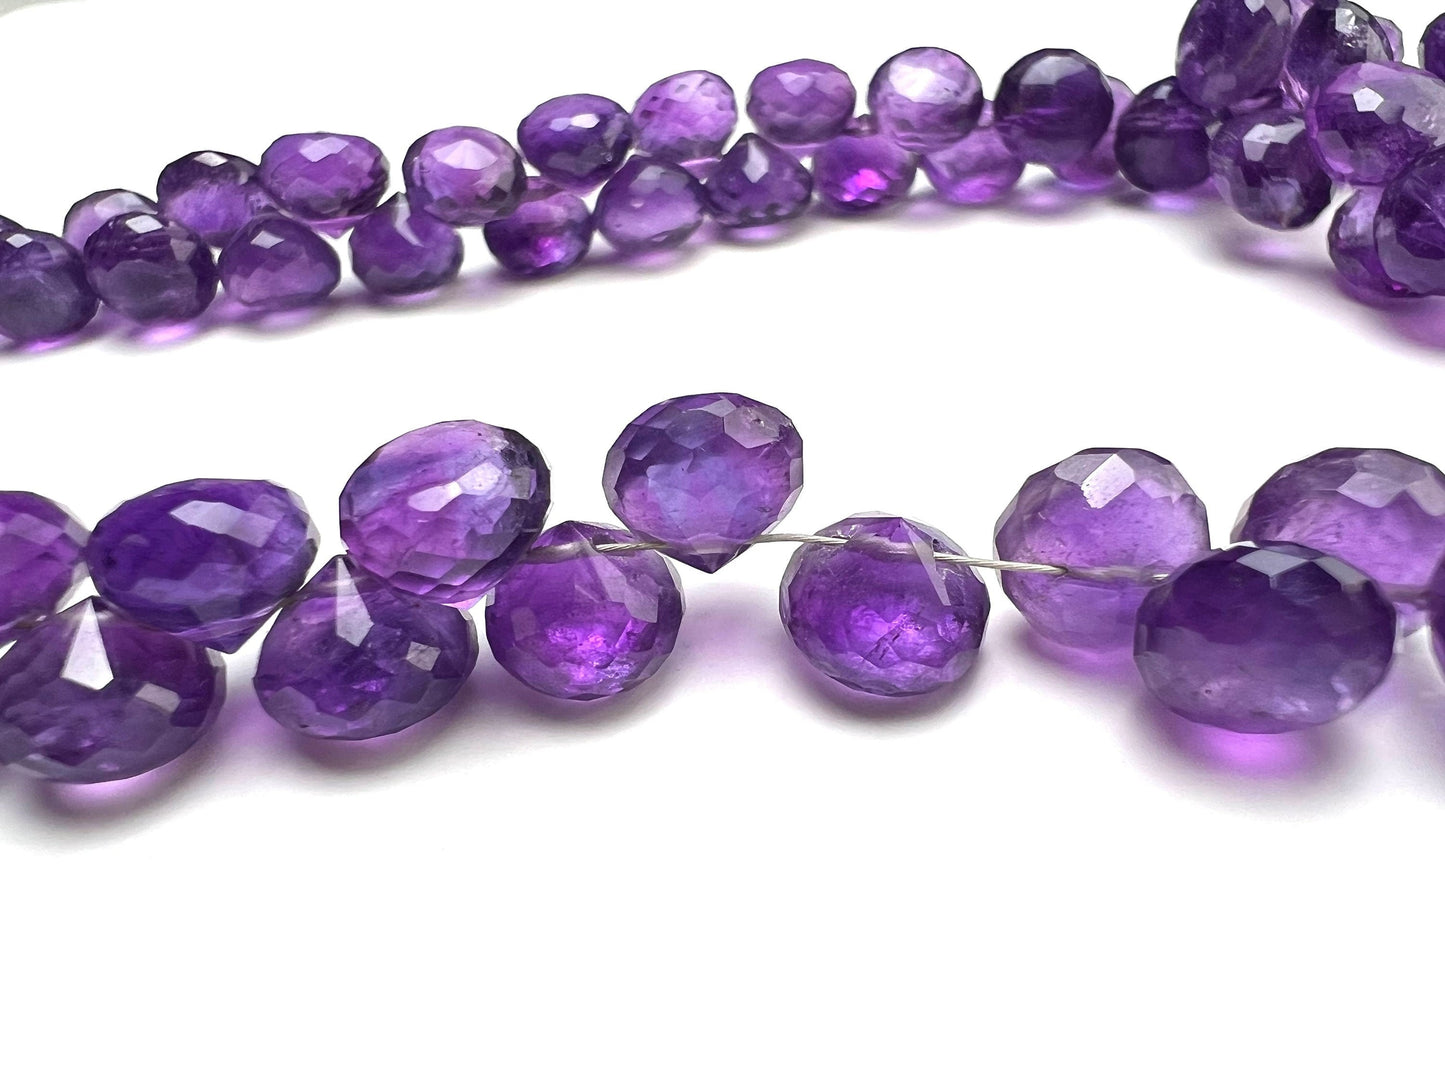 Natural Amethyst Faceted Onion drop 8.5-9.5mm AAA quality beautiful Rich Purple Amethyst for Jewelry Making DIY Gemstone Beads, 6,10,20 pcs